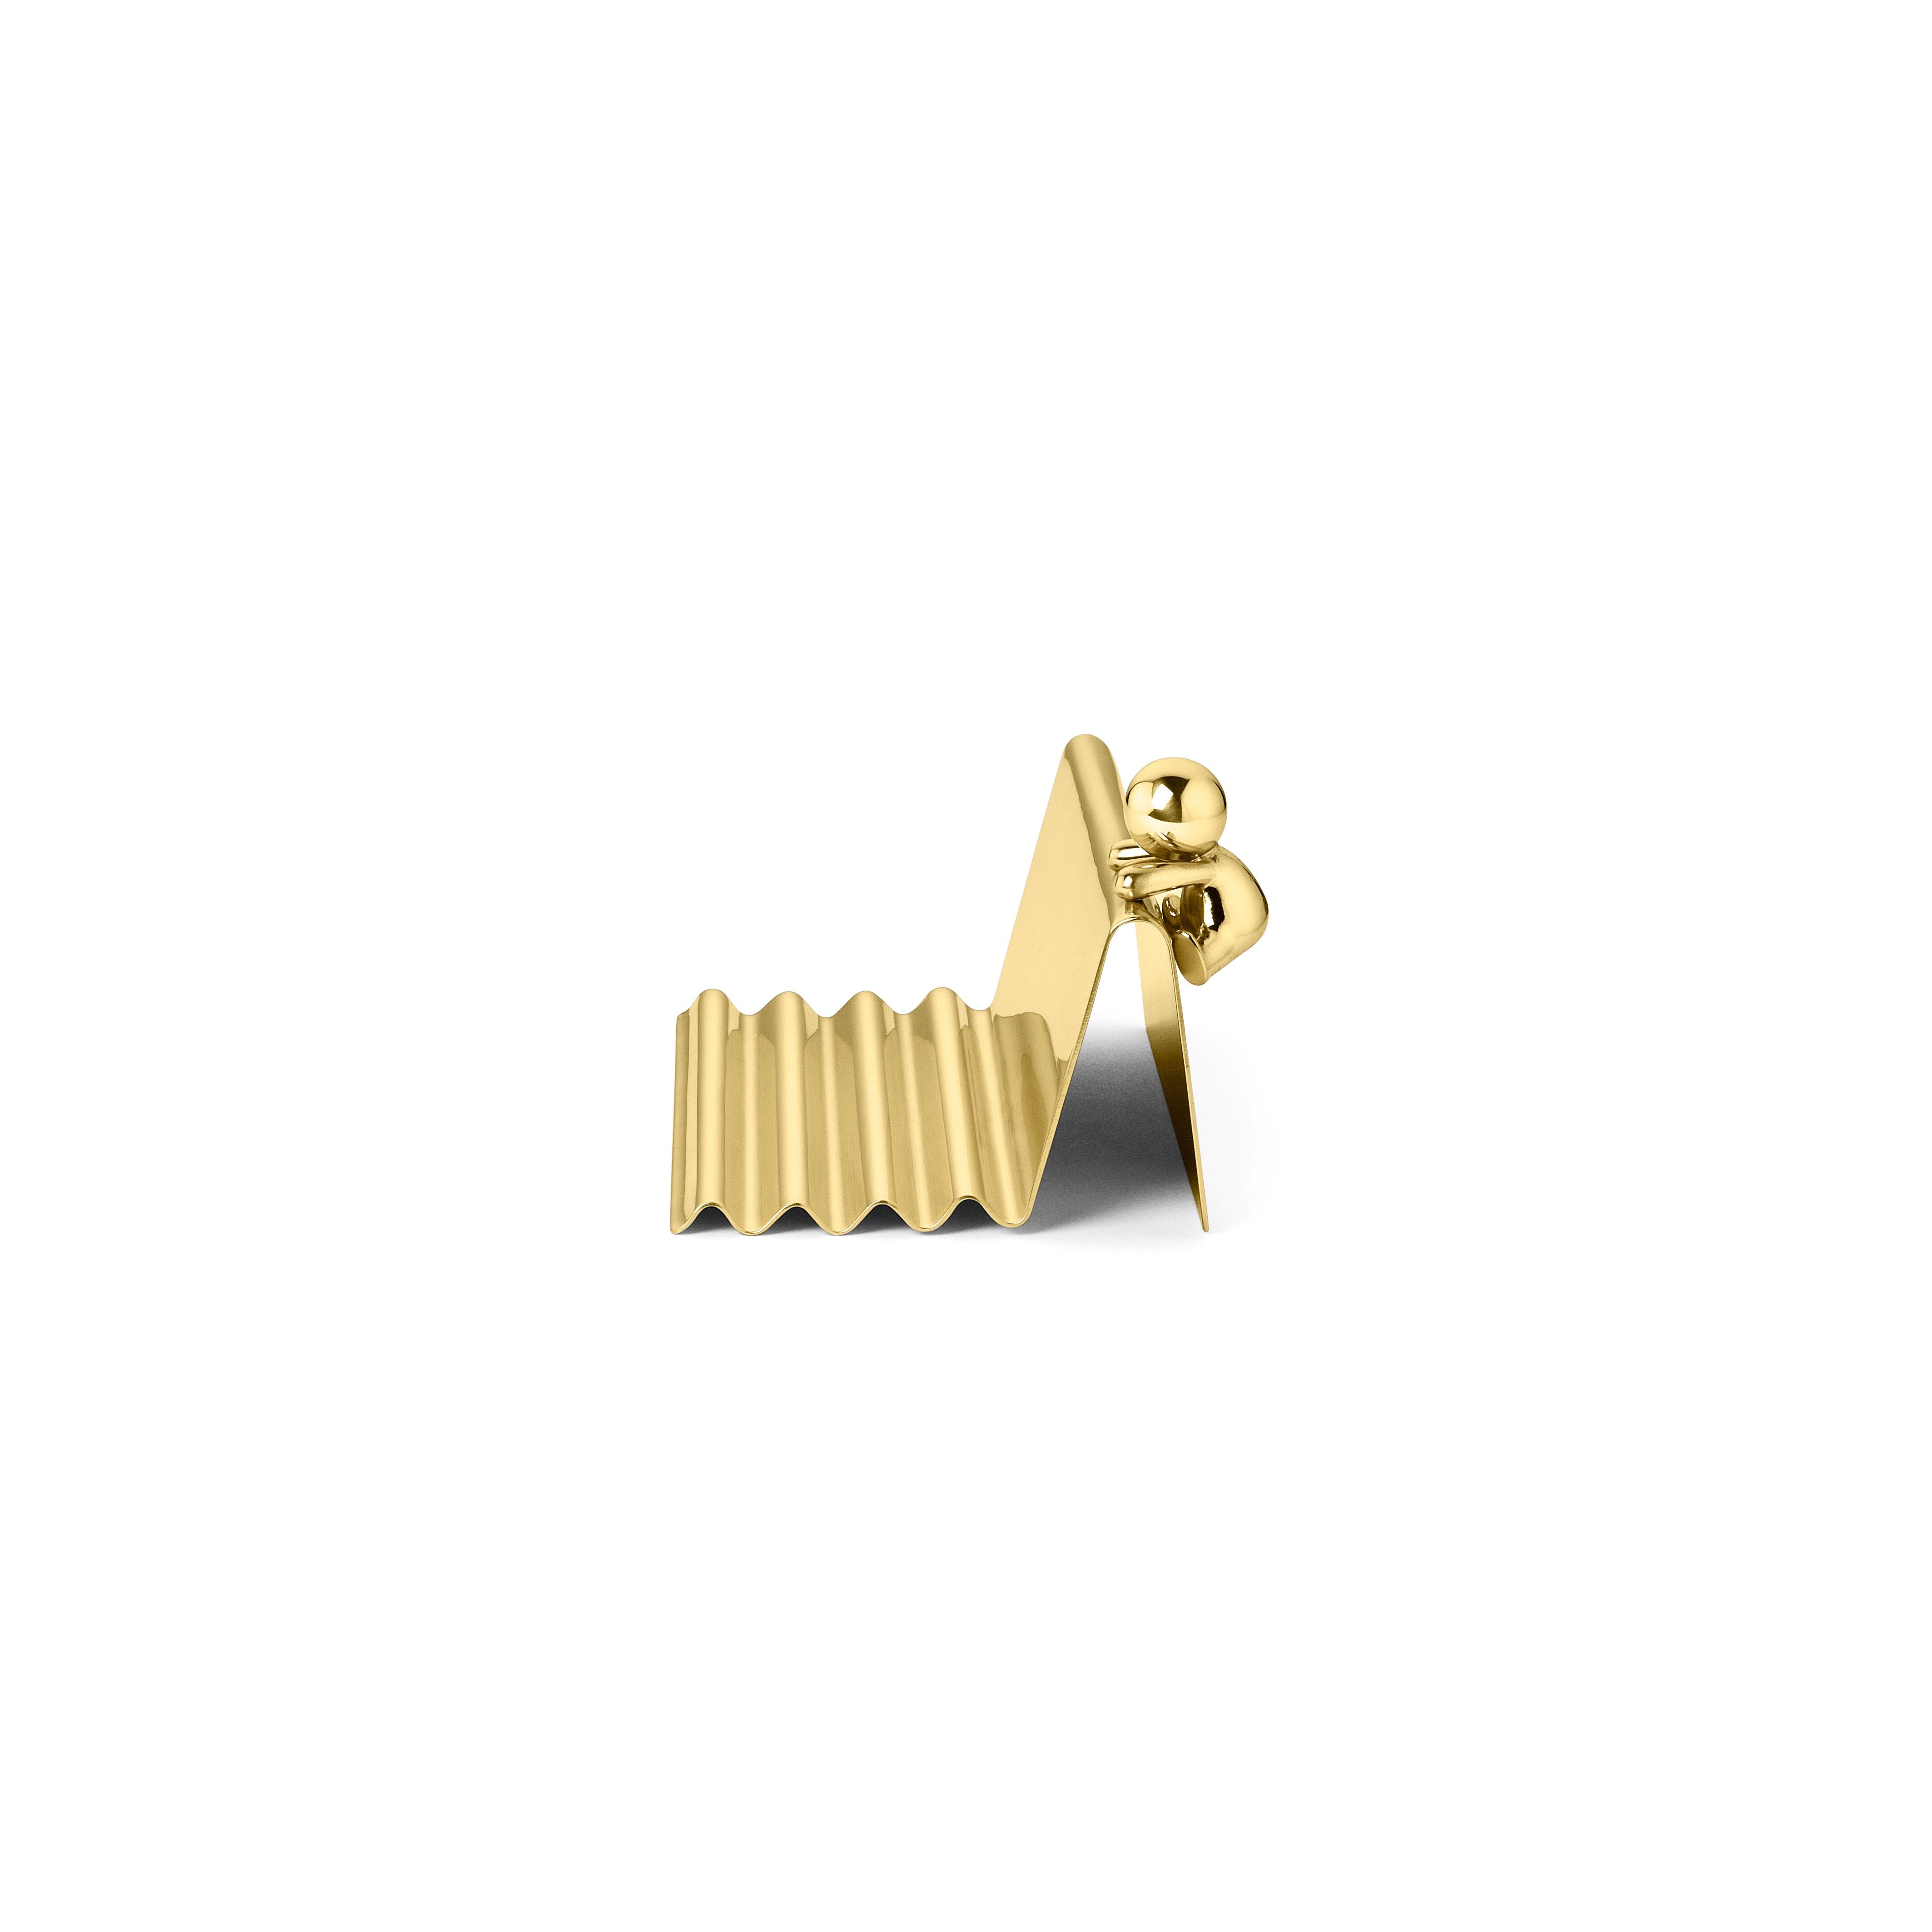 Pencils tray in brass
Omini is a family of products that plays on the inclusion and the relationship between the human figure with a series of monolithic objects from geometric and minimalist design. Small Lilliputians attack and animate the pure